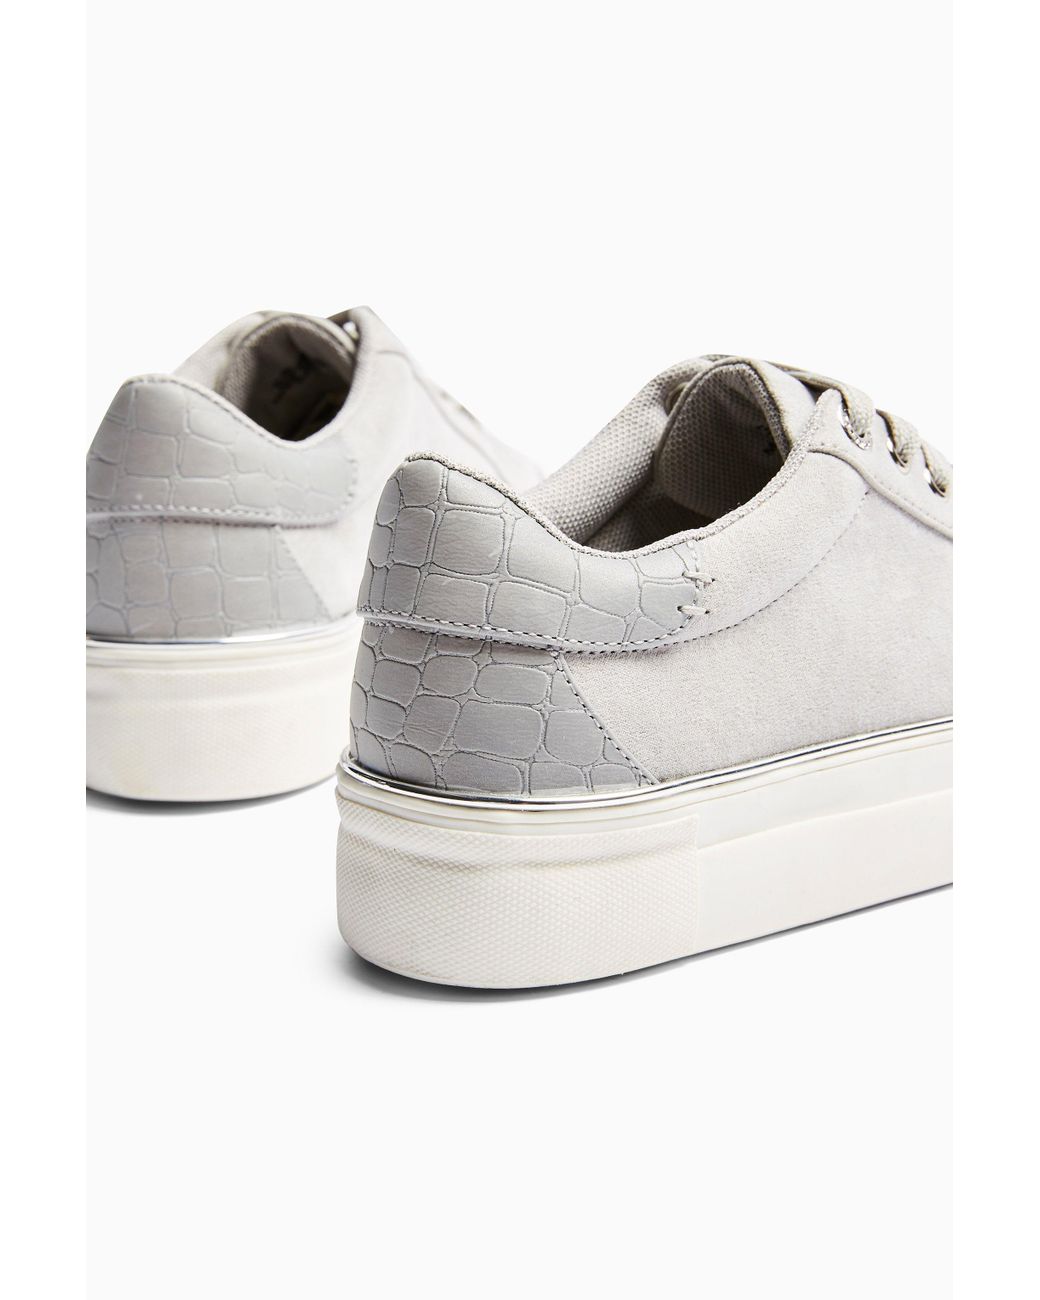 topshop trainers sale